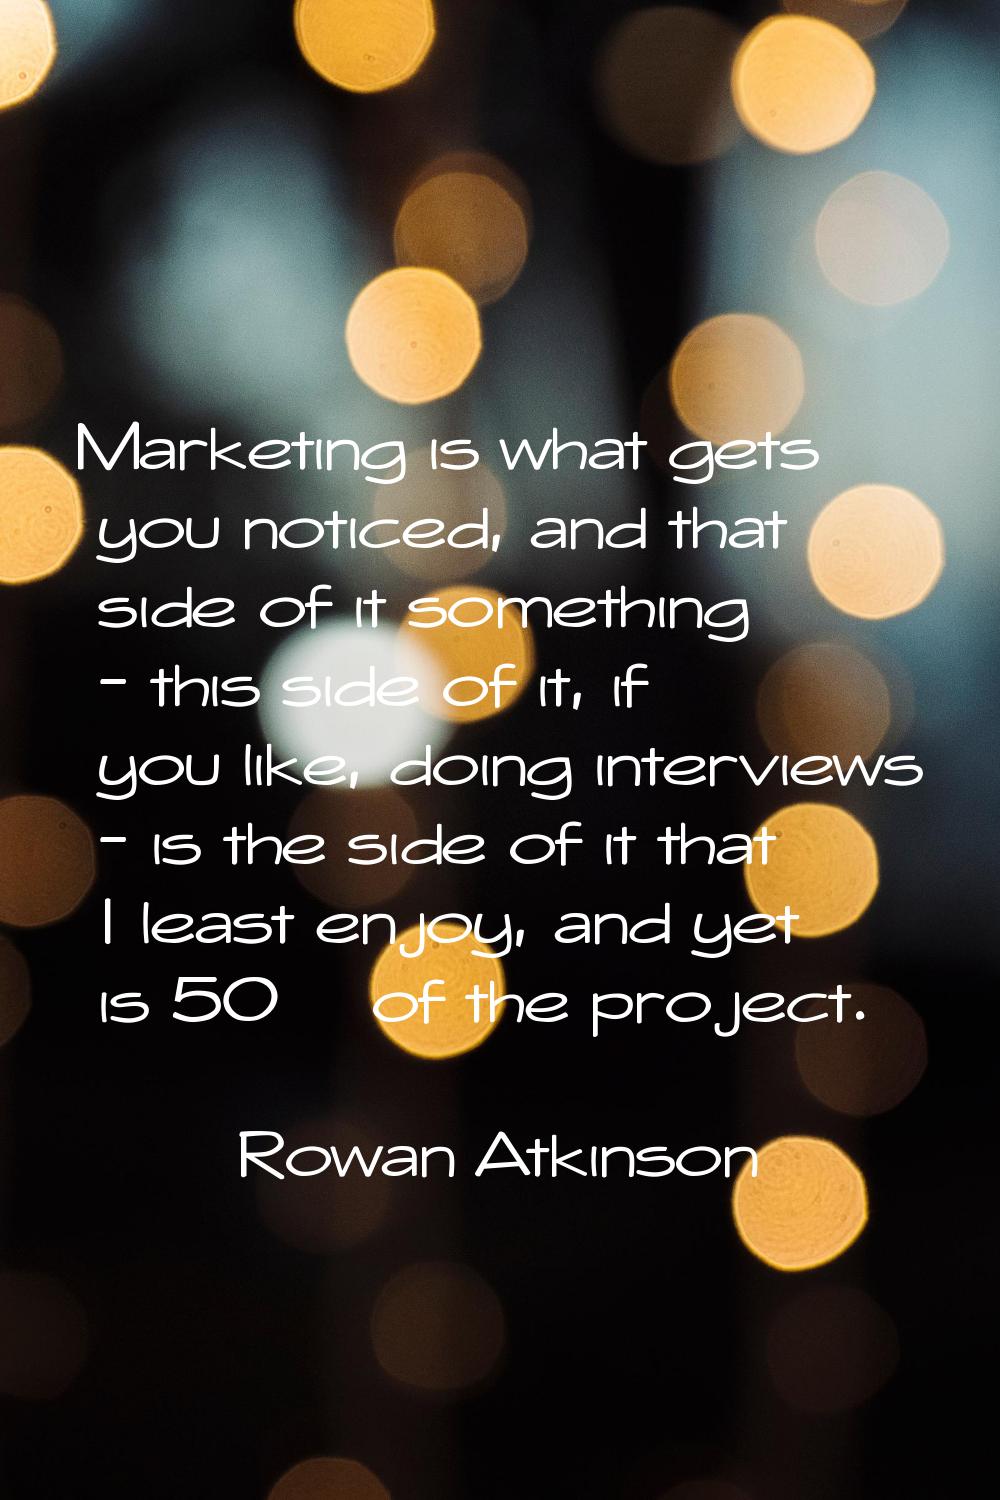 Marketing is what gets you noticed, and that side of it something - this side of it, if you like, d